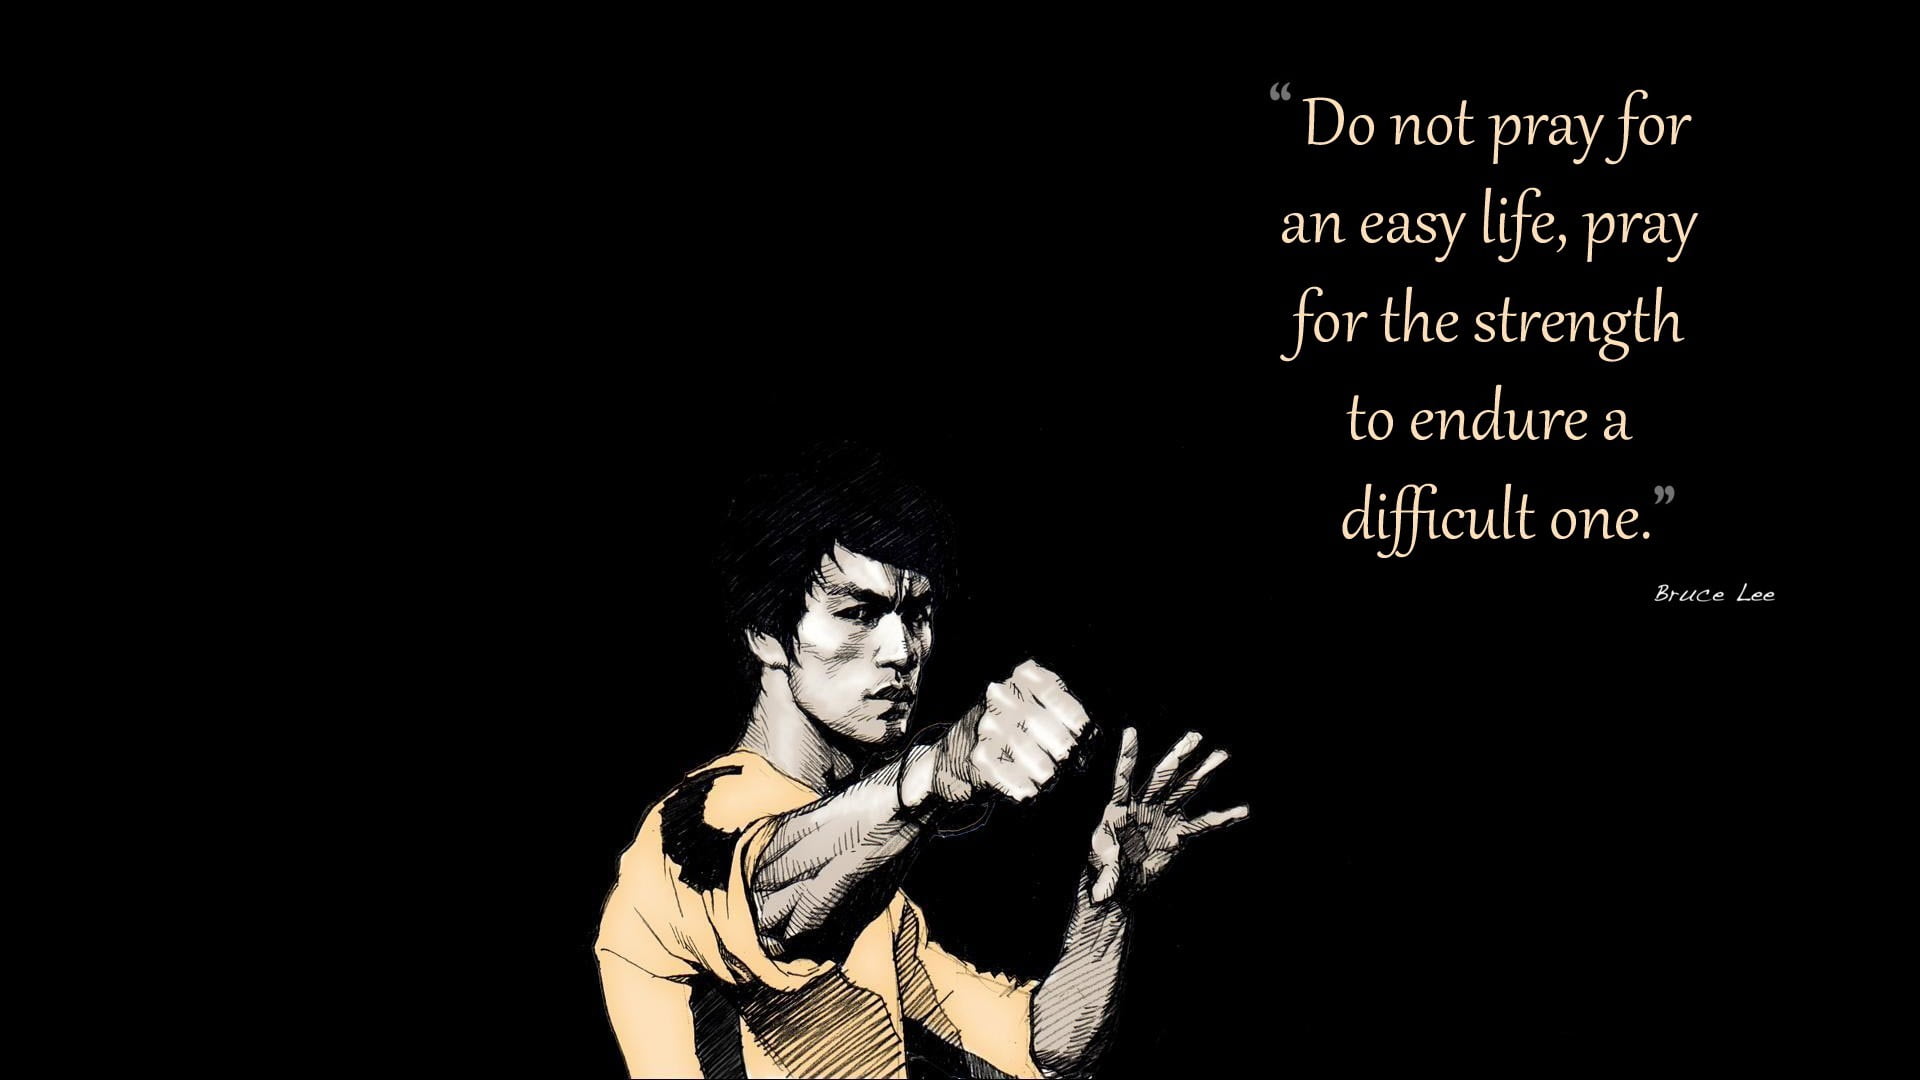 Bruce Lee, black, yellow, quote